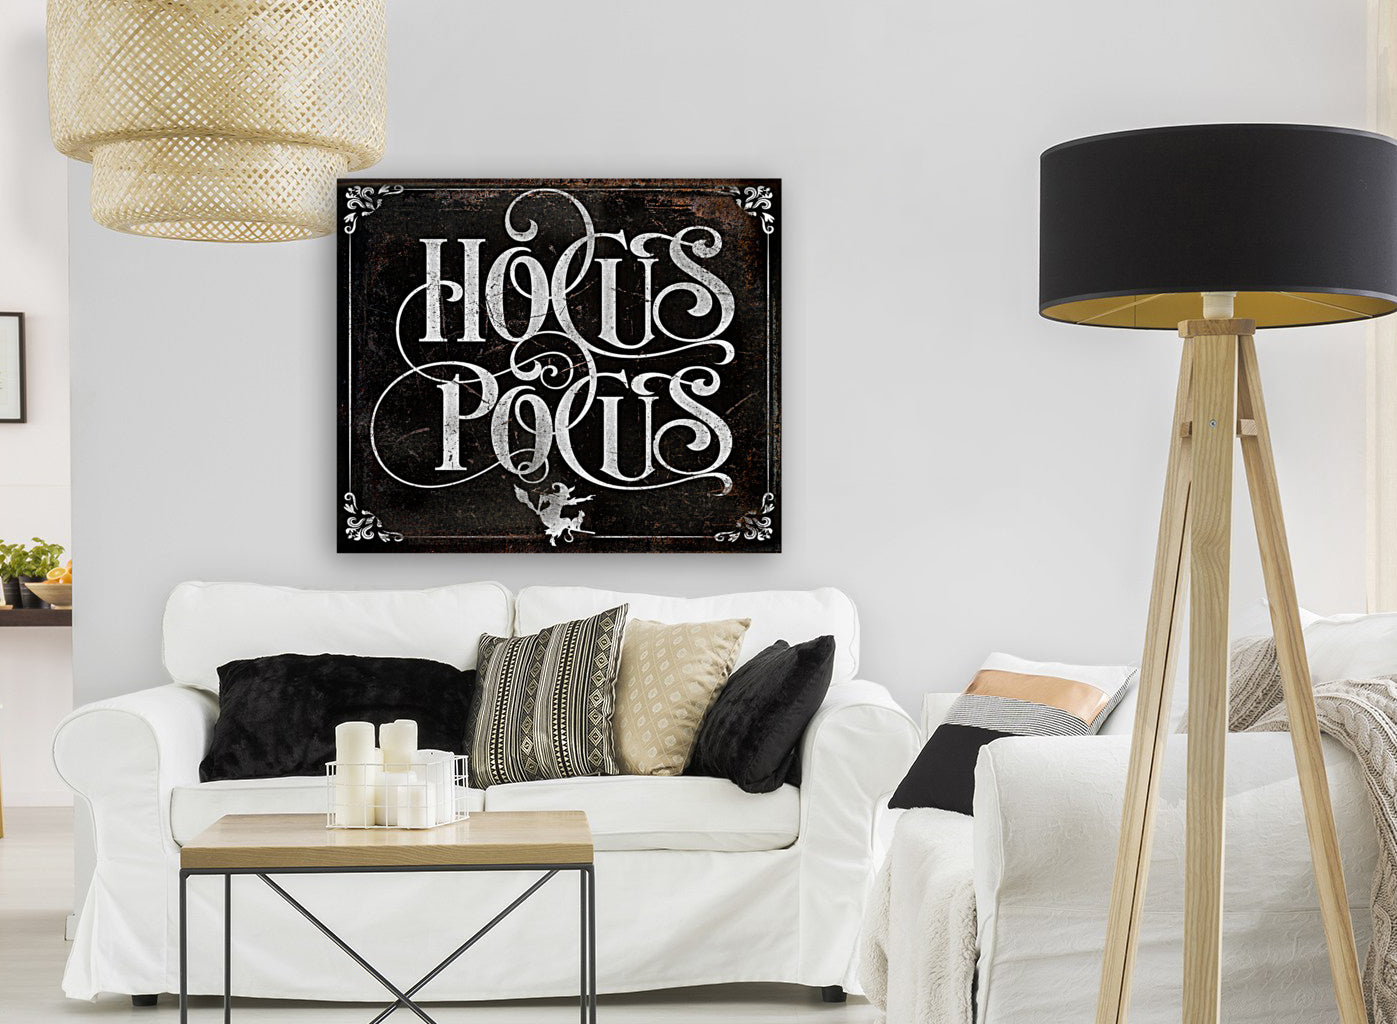 Halloween Wall decor Hocus Pocus on black distressed background with the words: Hocus Pocus in fancy lettering.